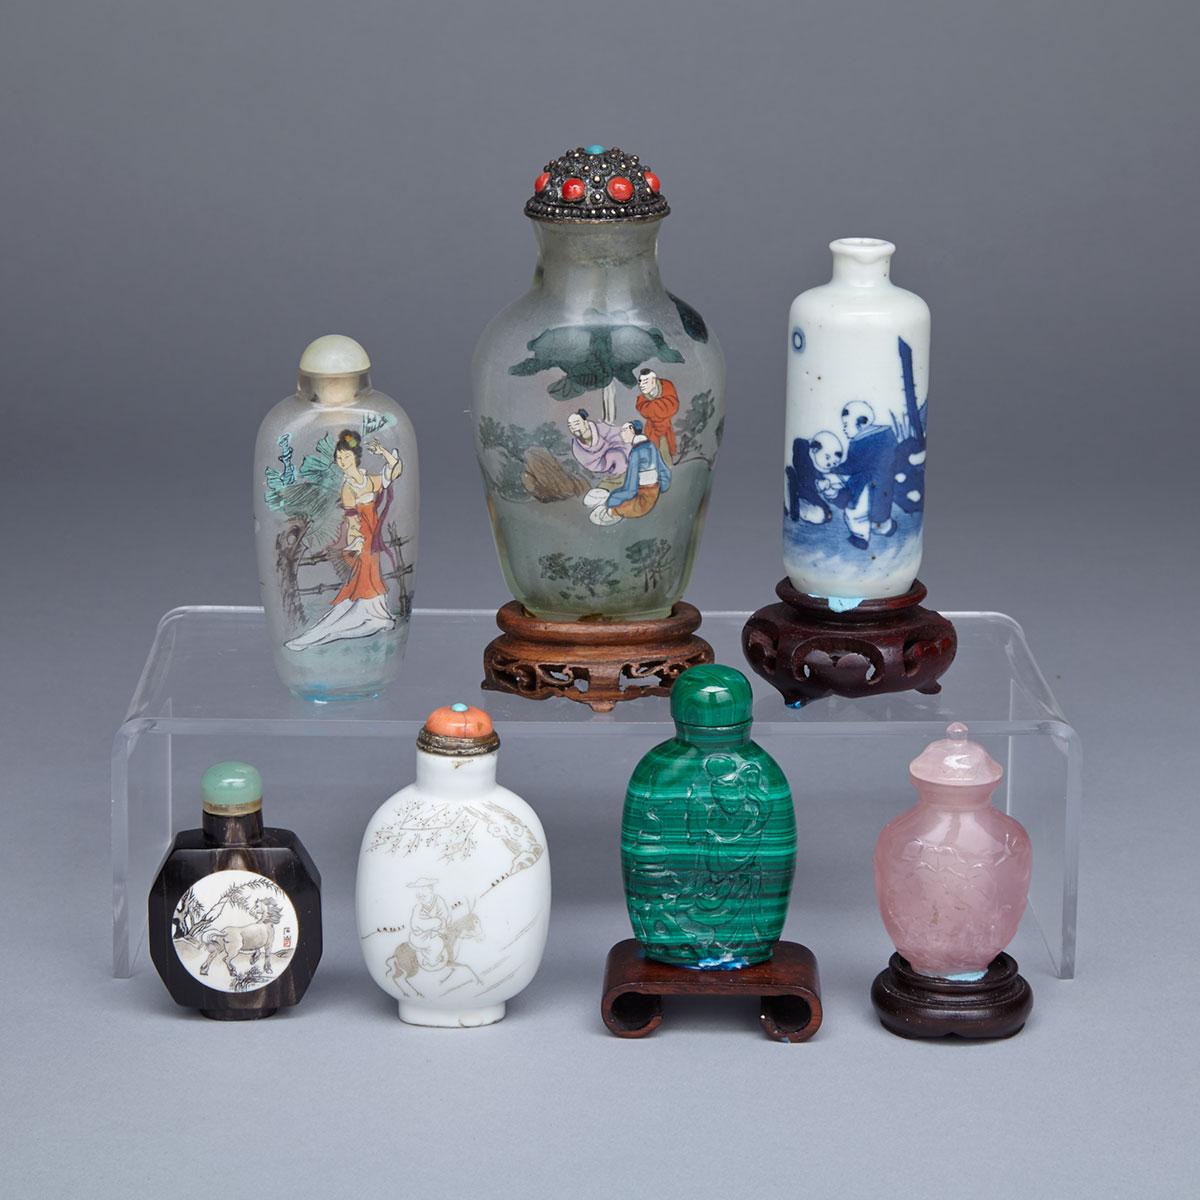 Group of Seven Assorted Snuff Bottles, 19th/20th Century